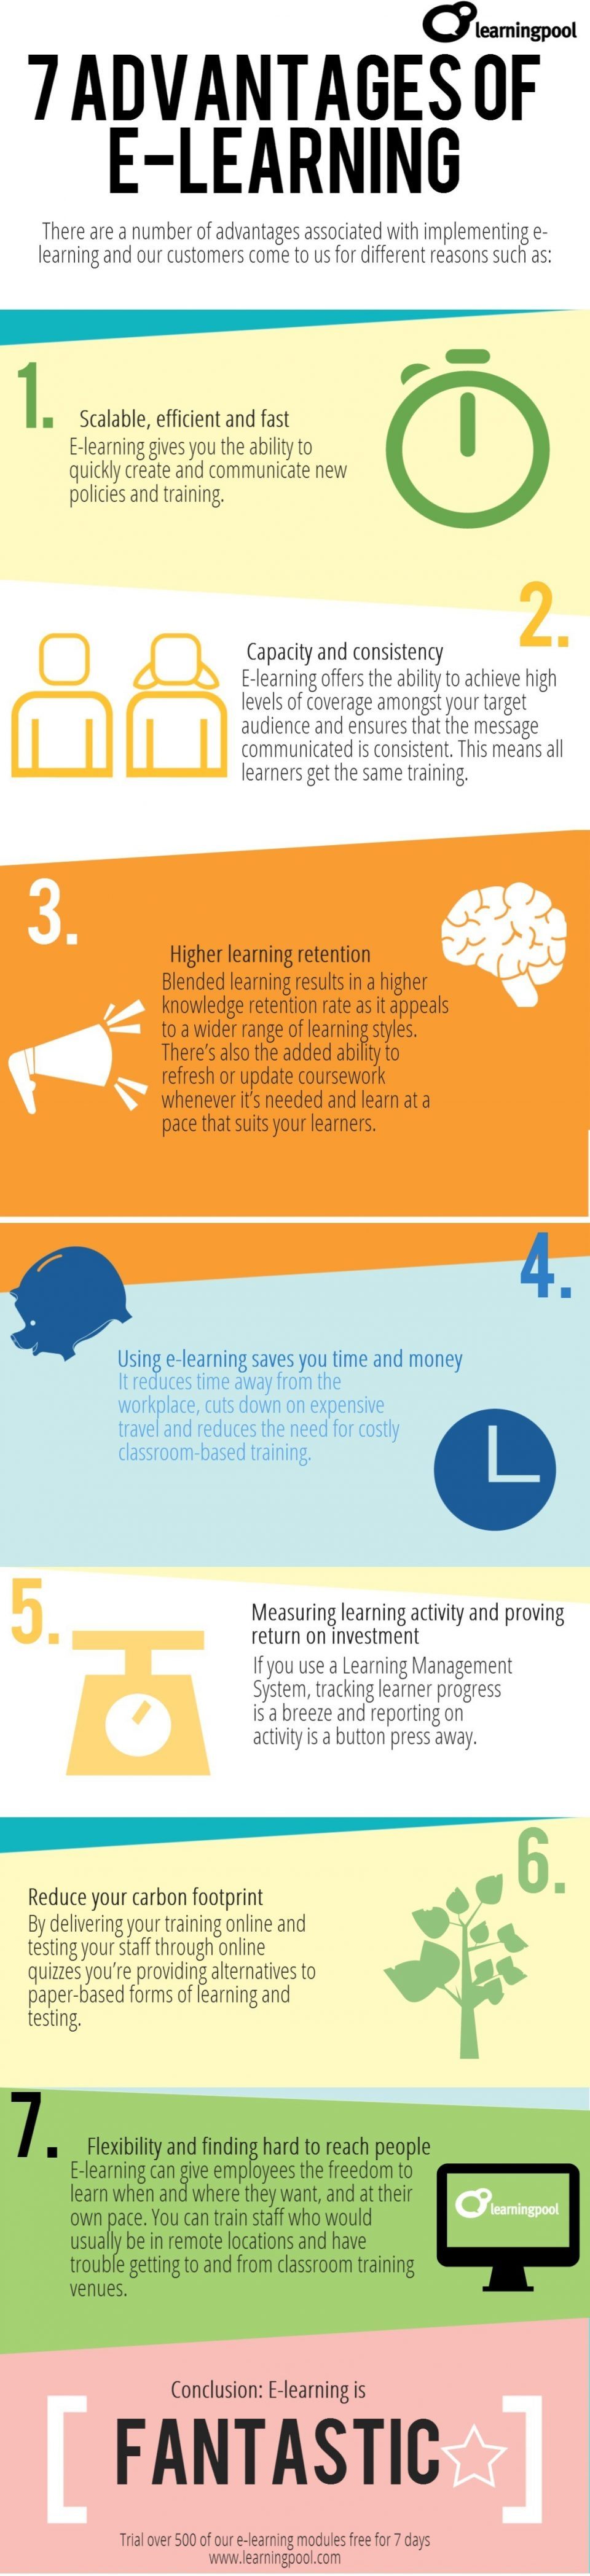 Top 7 e-Learning Advantages Infographic